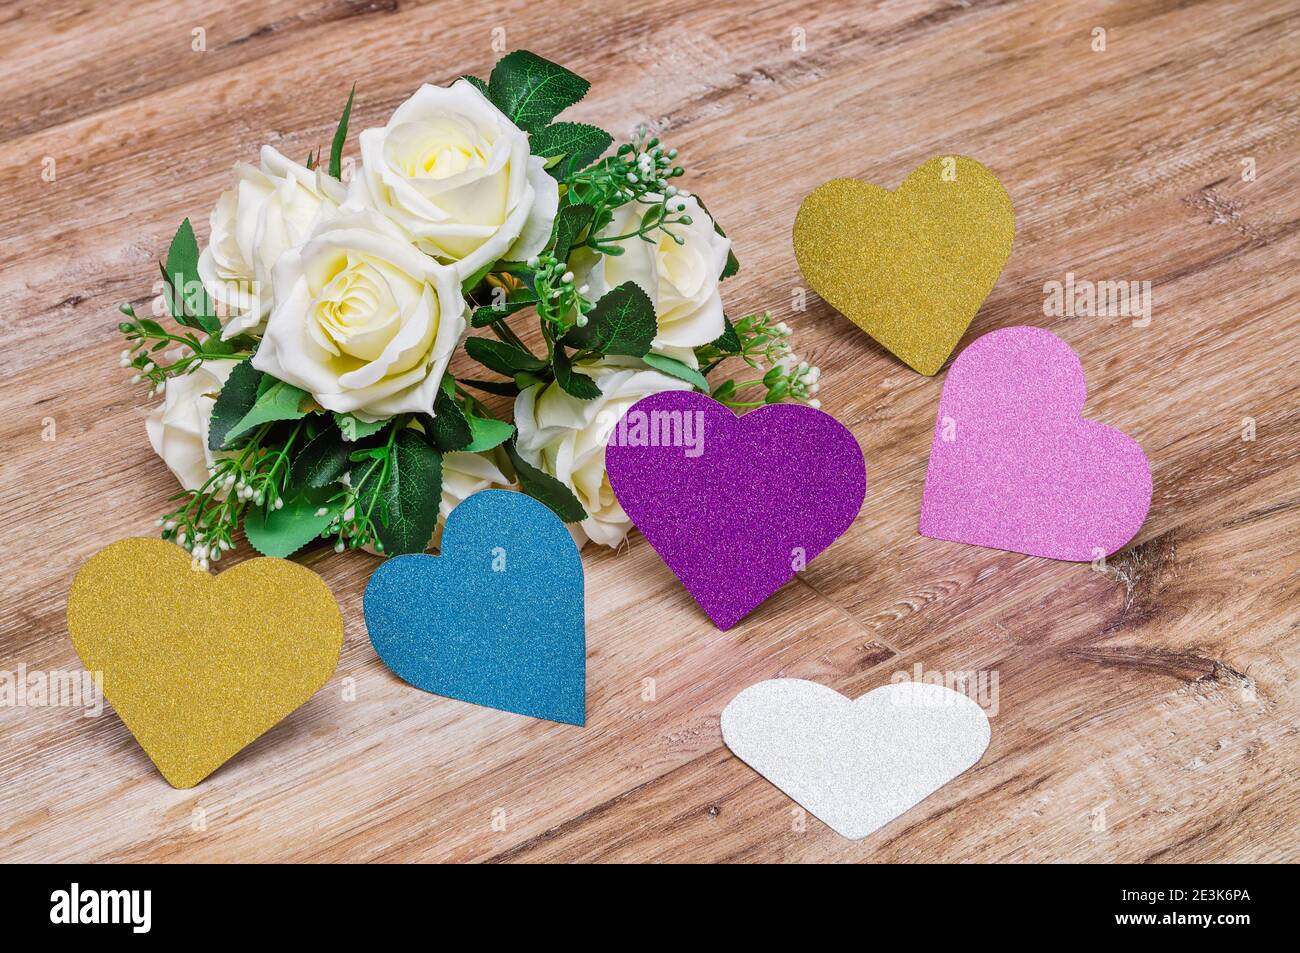 cards on the occasion of Valentine's Day, Mother's Day, Women's or Birthday's Day, space for text, glitter colored hearts, jewelry boxes Stock Photo